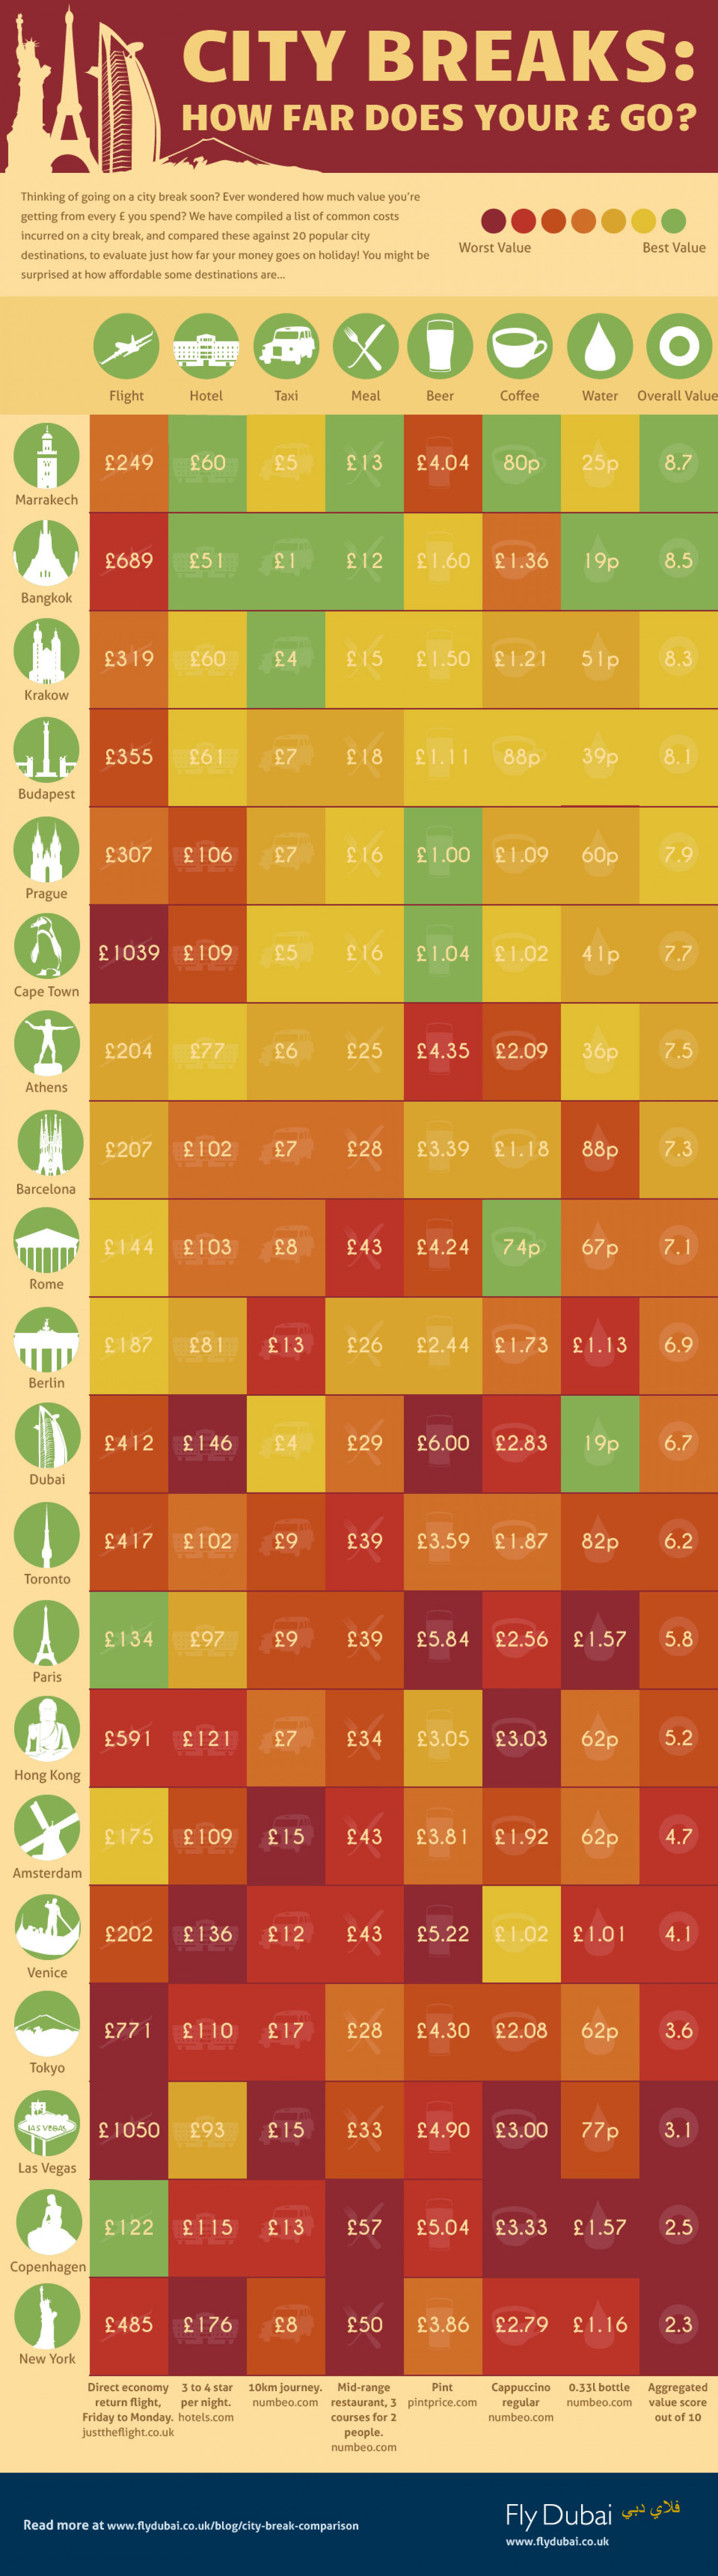 City Breaks: How Far Does Your Pound Go? Infographic